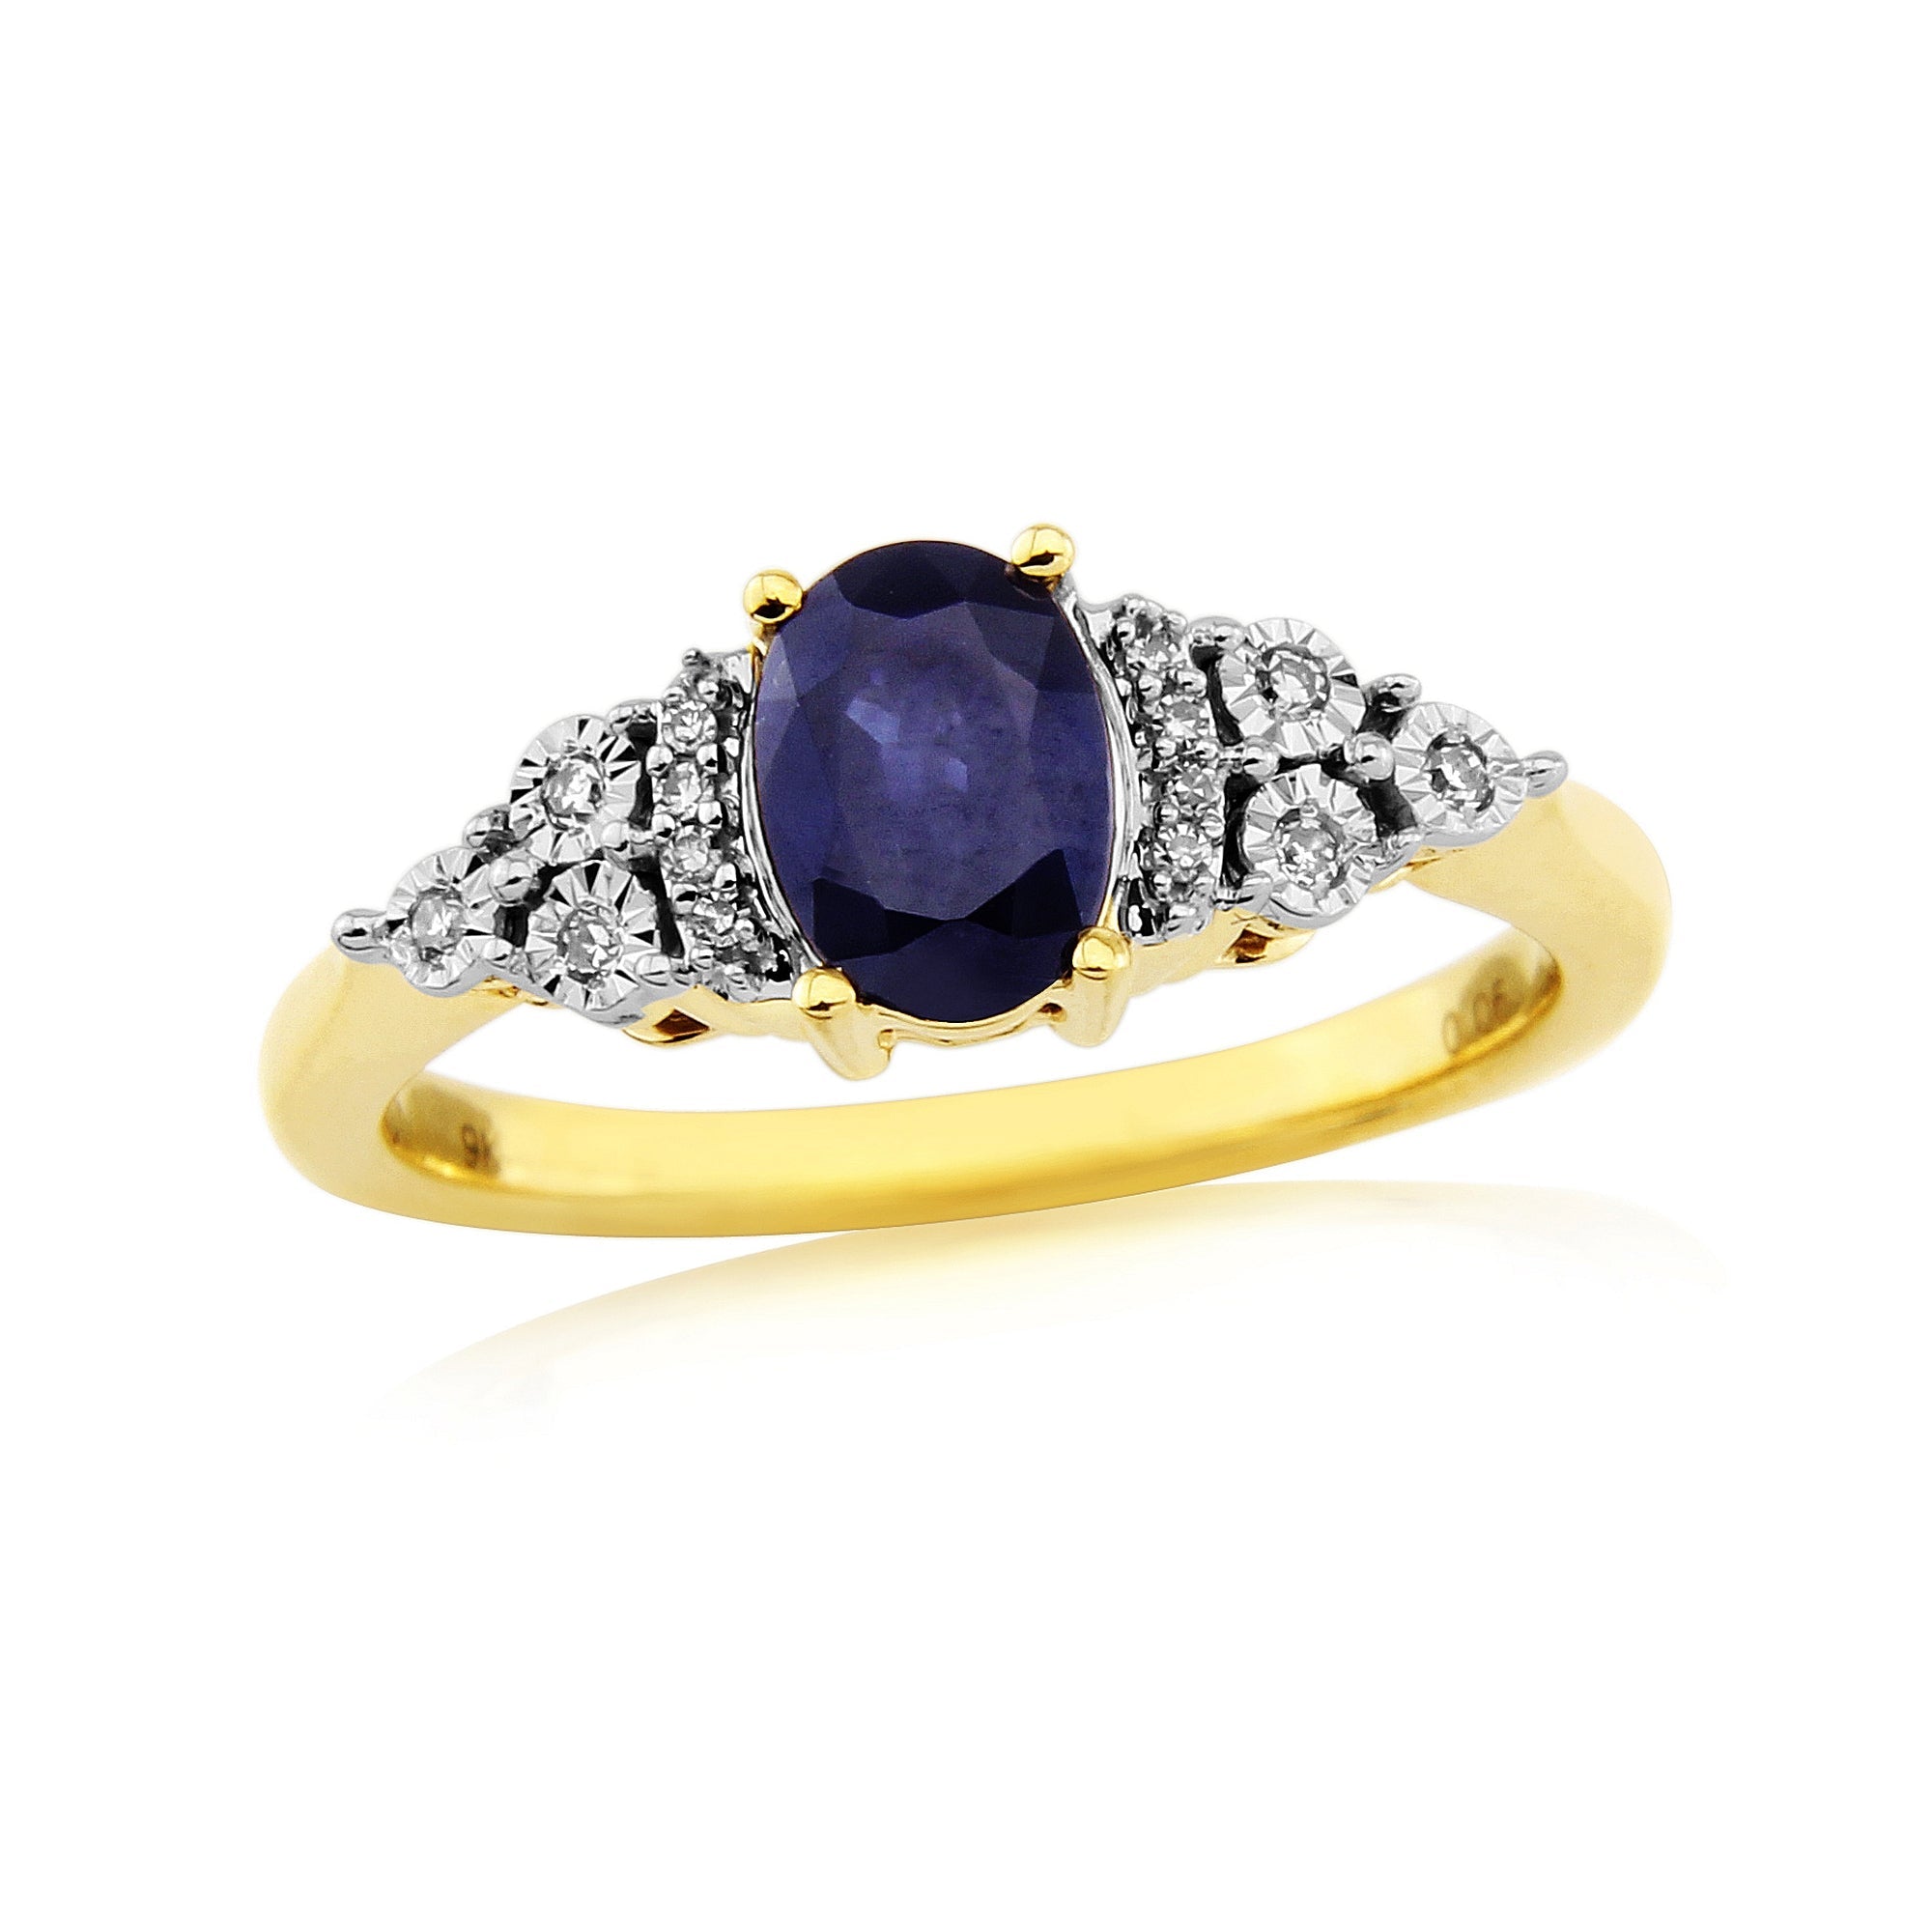 9ct gold 7x5mm oval sapphire & miracle plate diamond ring 0.06ct